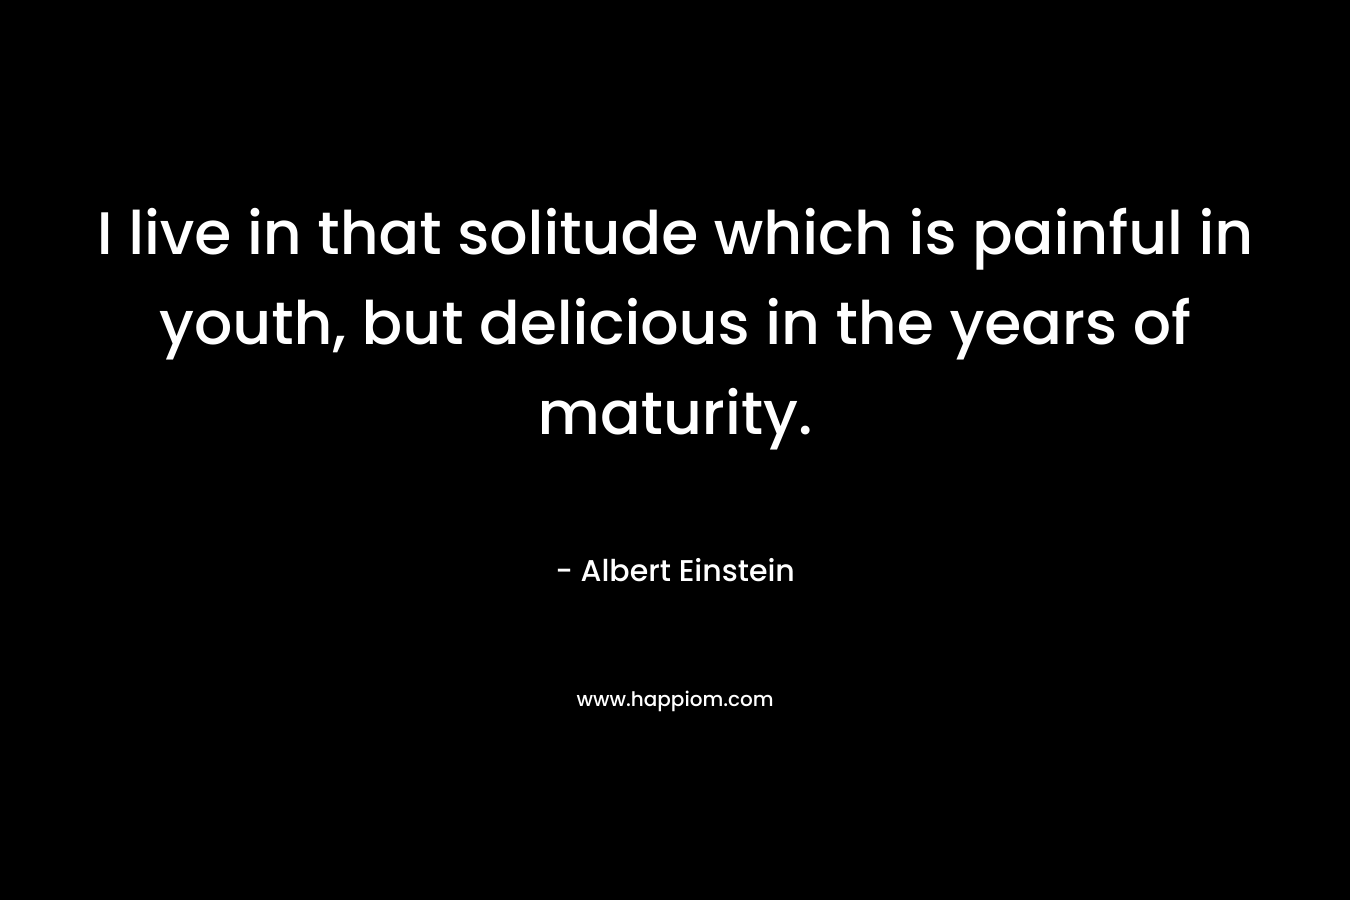 I live in that solitude which is painful in youth, but delicious in the years of maturity. – Albert Einstein